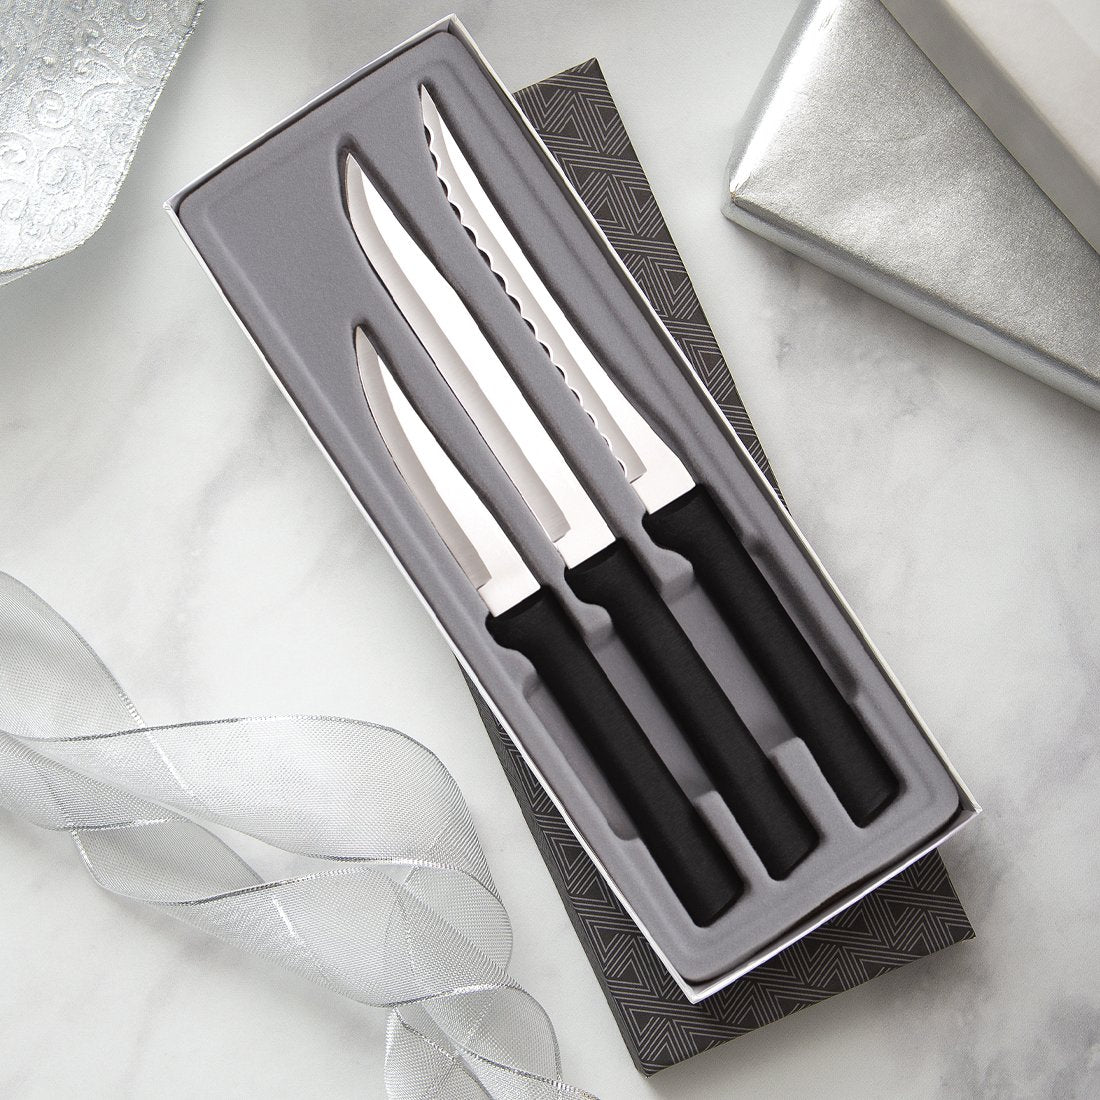 https://cdn.shopify.com/s/files/1/2226/2969/products/cooking-essentials-gift-set-G249-a_2000x.jpg?v=1625752260